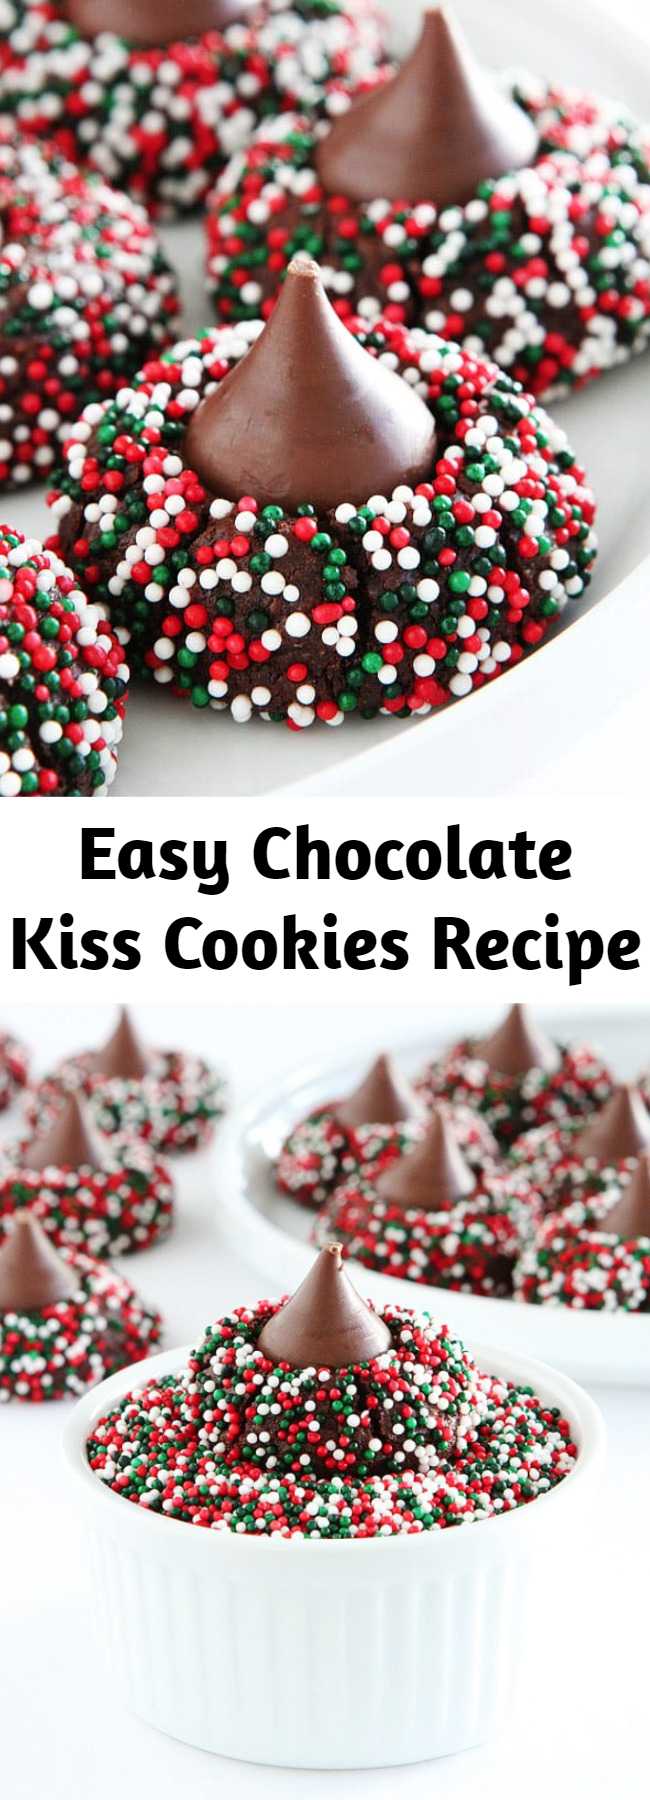 Easy Chocolate Kiss Cookies Recipe - Chocolate Kiss Cookies-decadent chocolate cookies rolled in sprinkles and topped with a chocolate kiss. A fun cookie for the holidays or any day! You can use any flavored kisses too as center toppings for this amazing cookie.